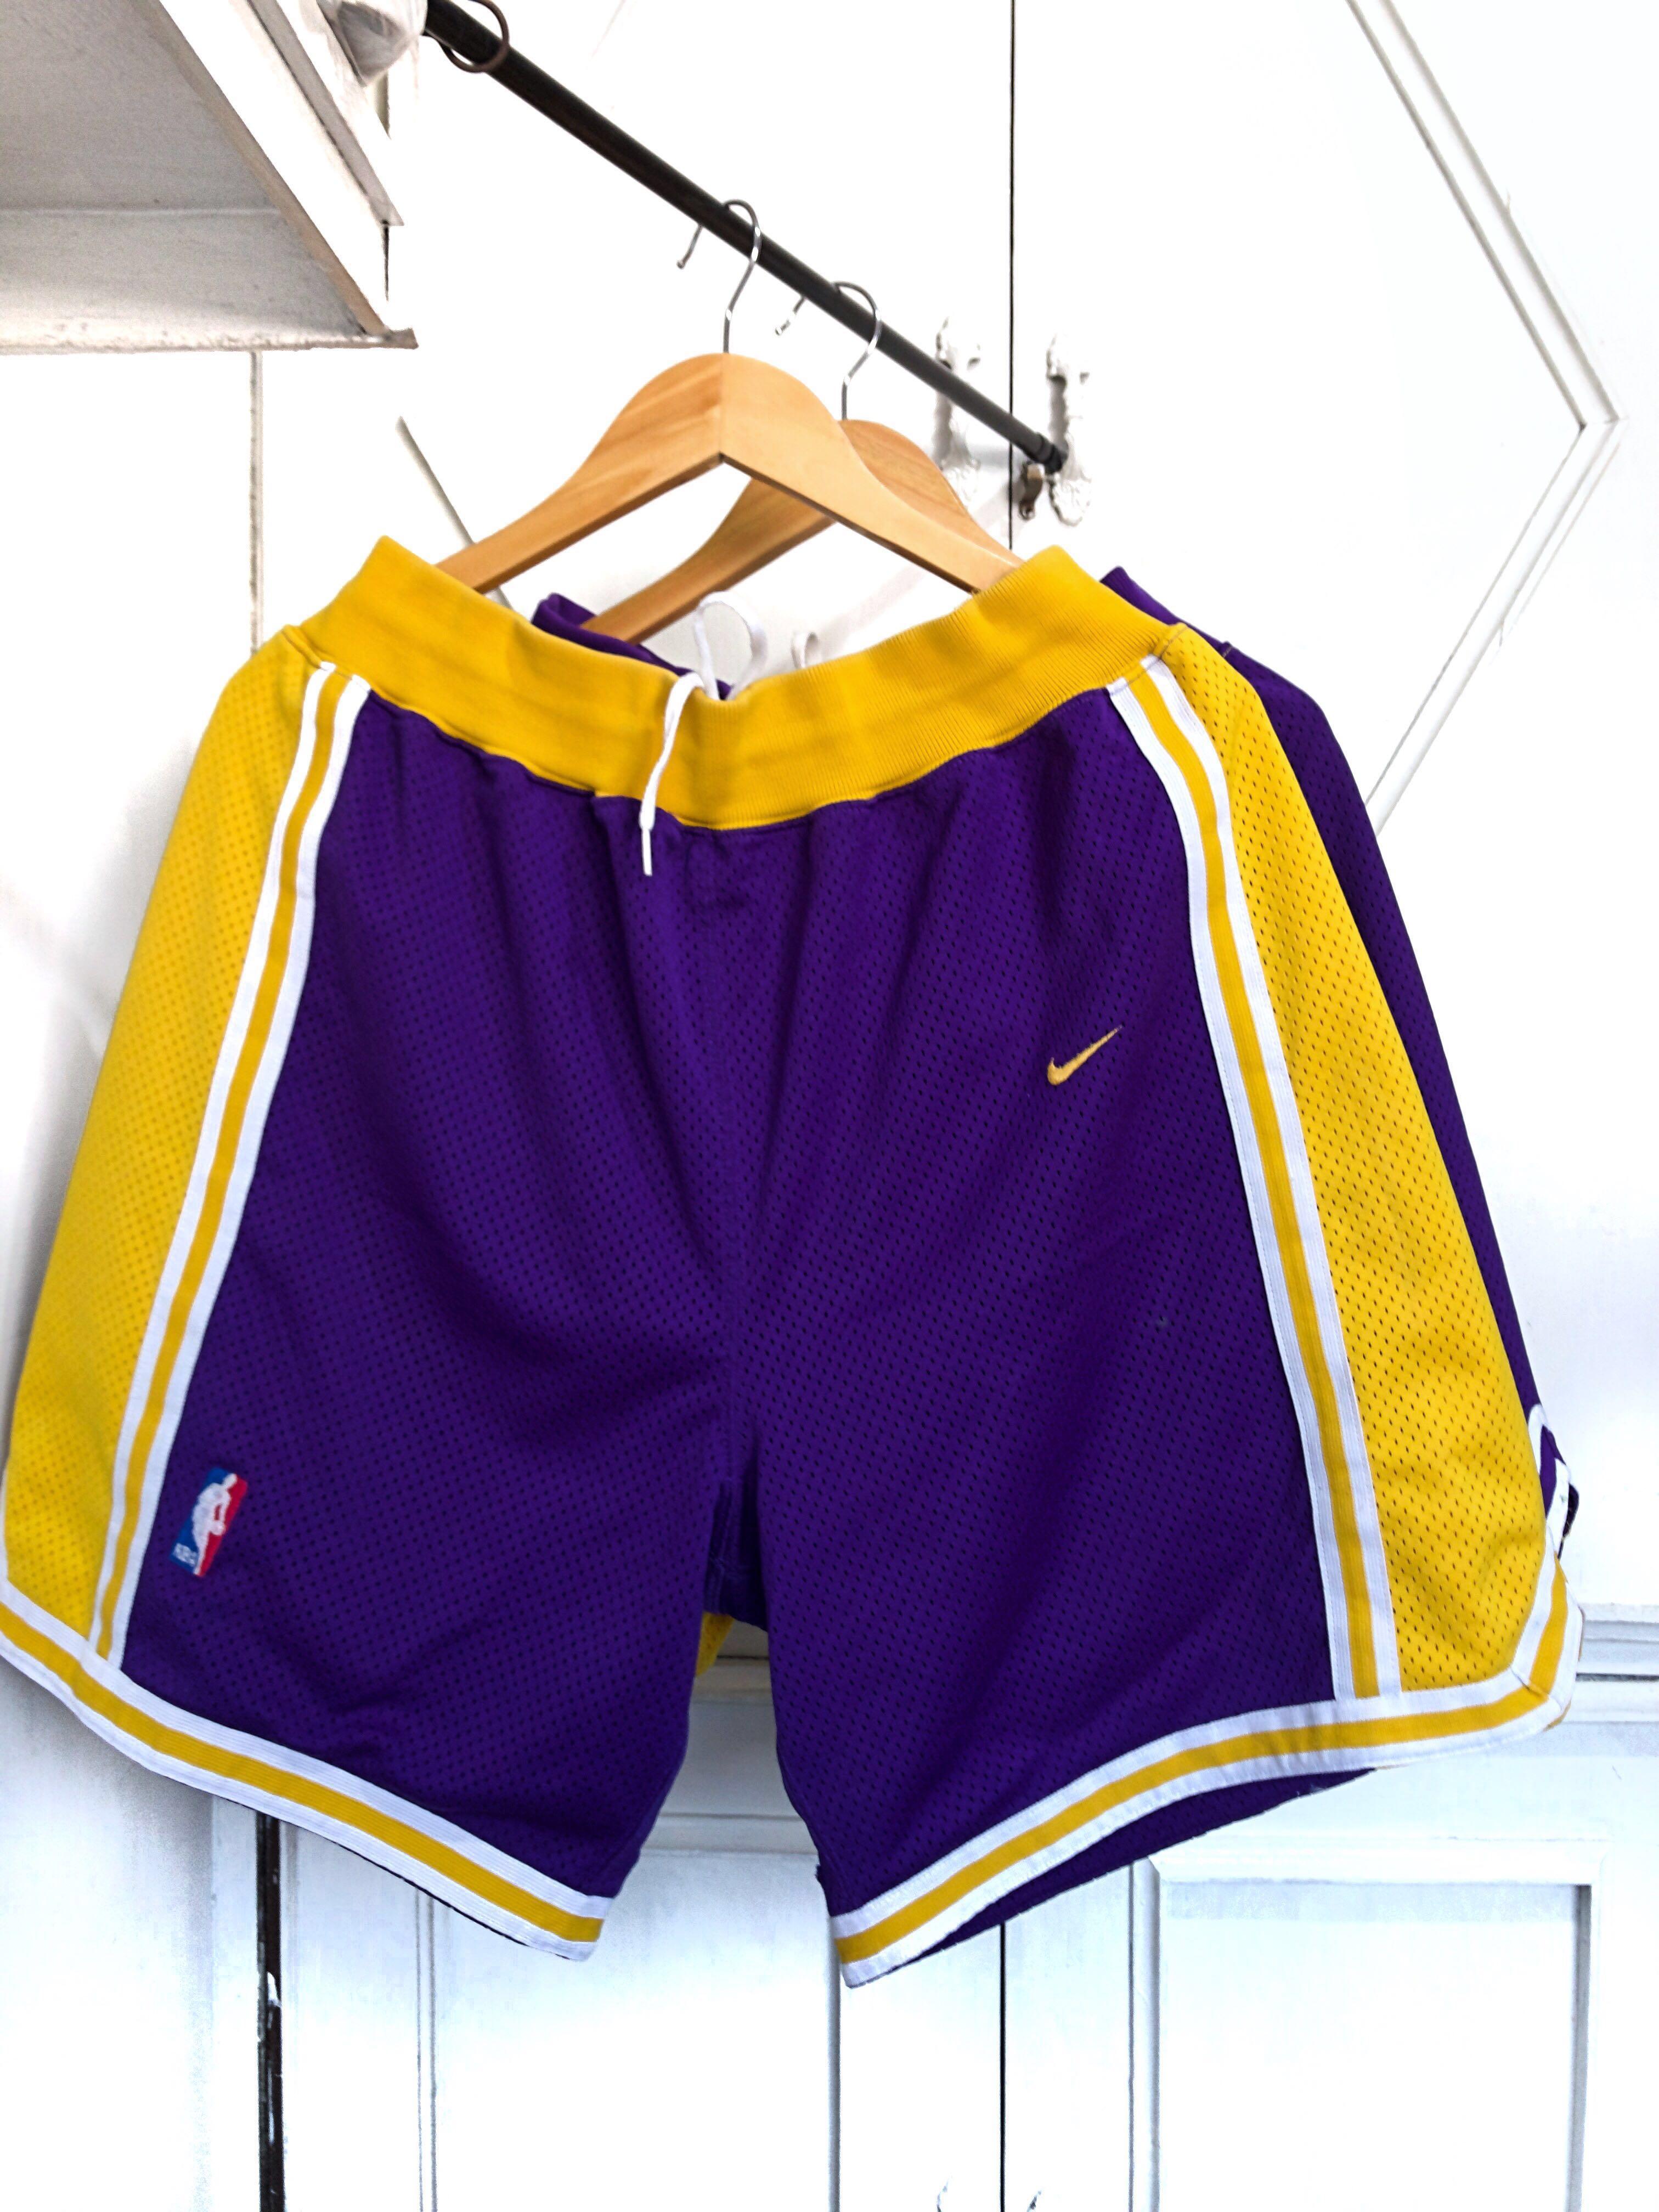 lakers game shorts